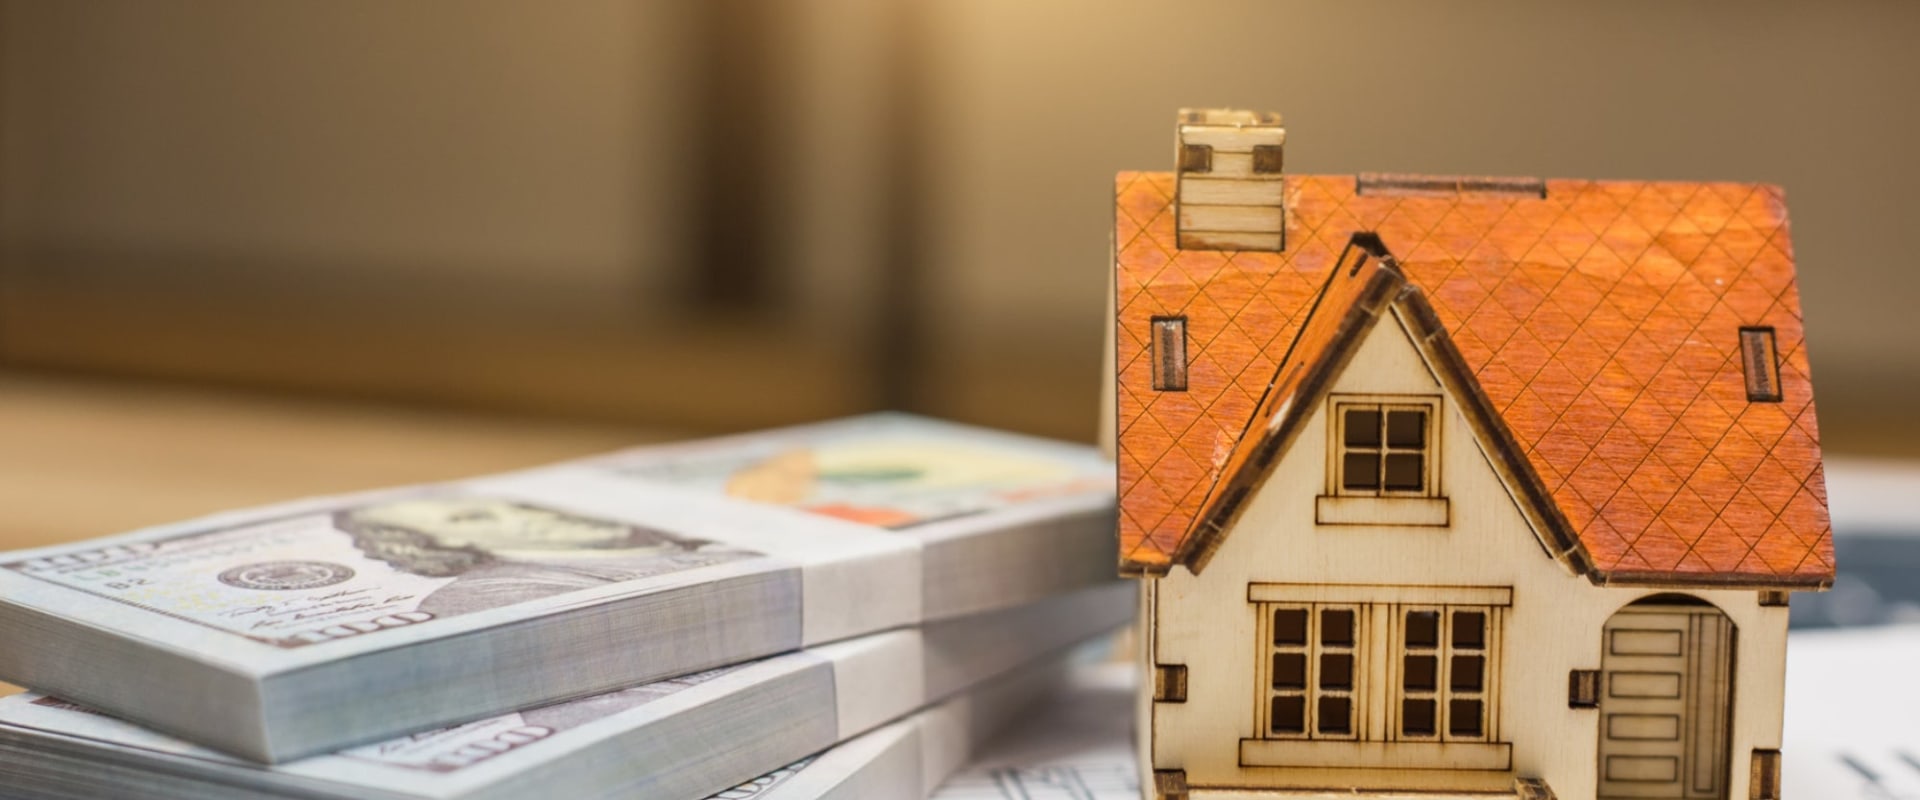 What does it mean when you invest in real estate?